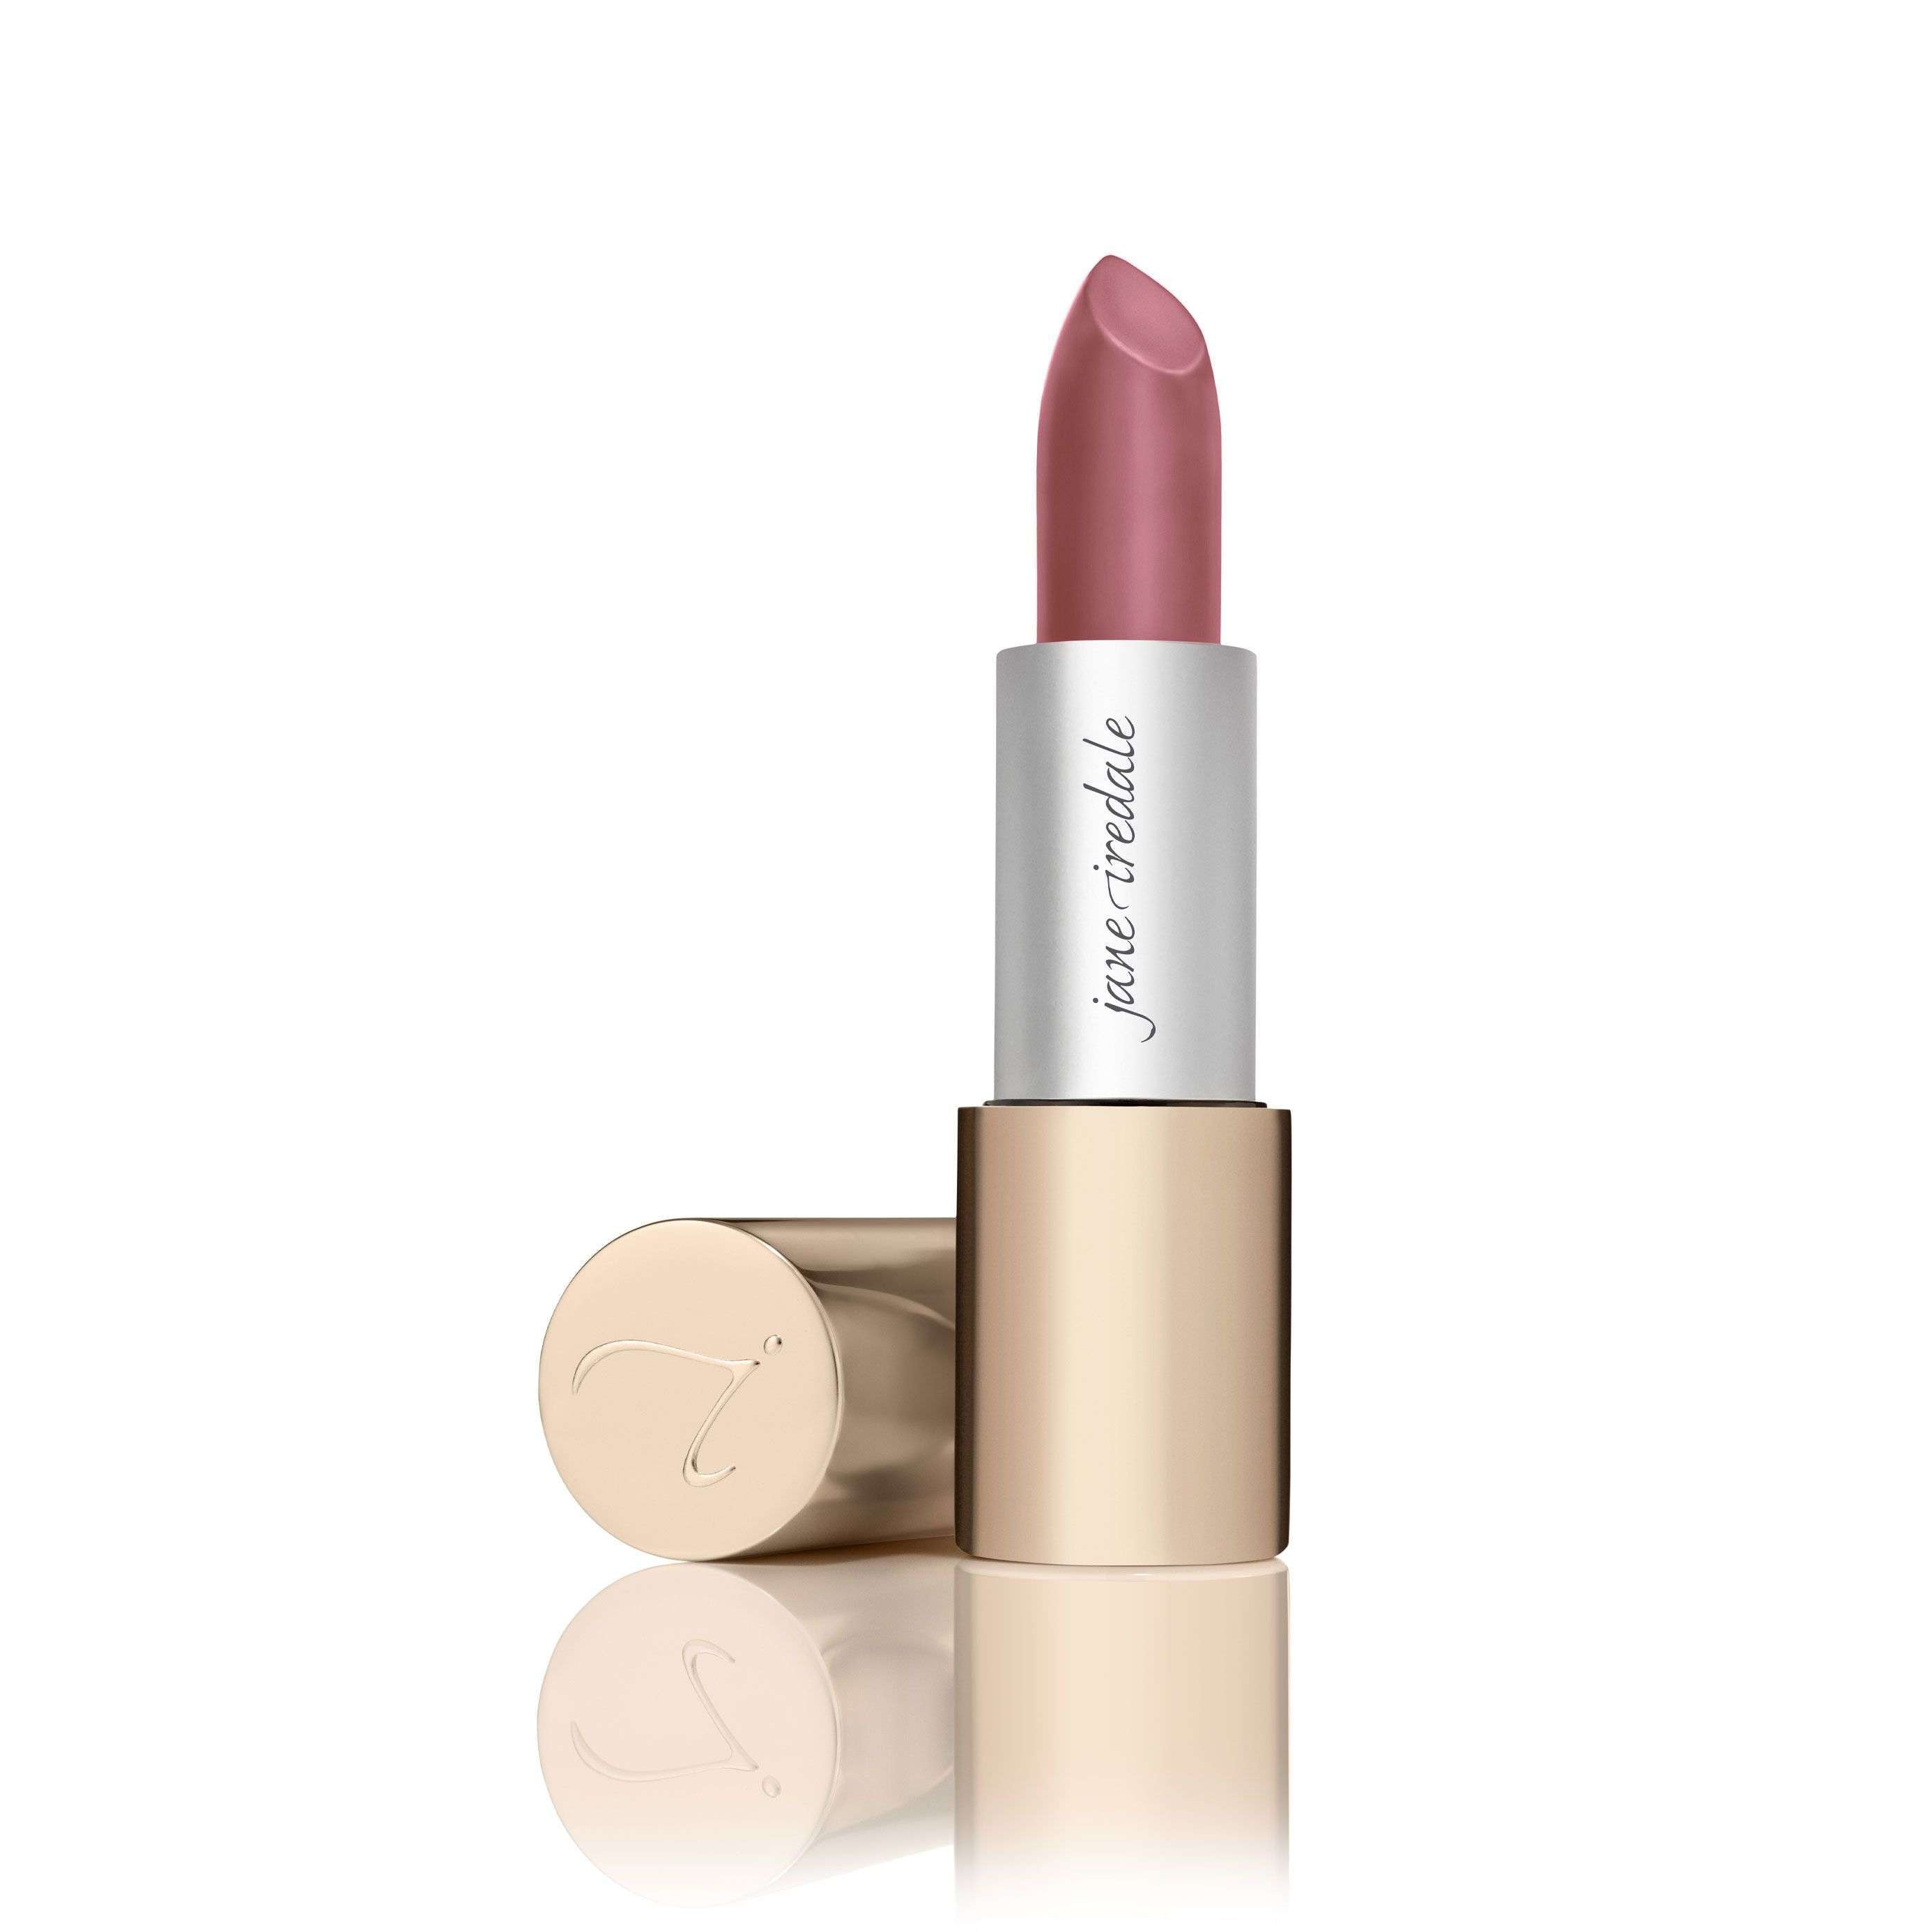 Jane Iredale Triple Luxe Long Lasting Naturally Moist Lipstick™ at Socialite Beauty Canada